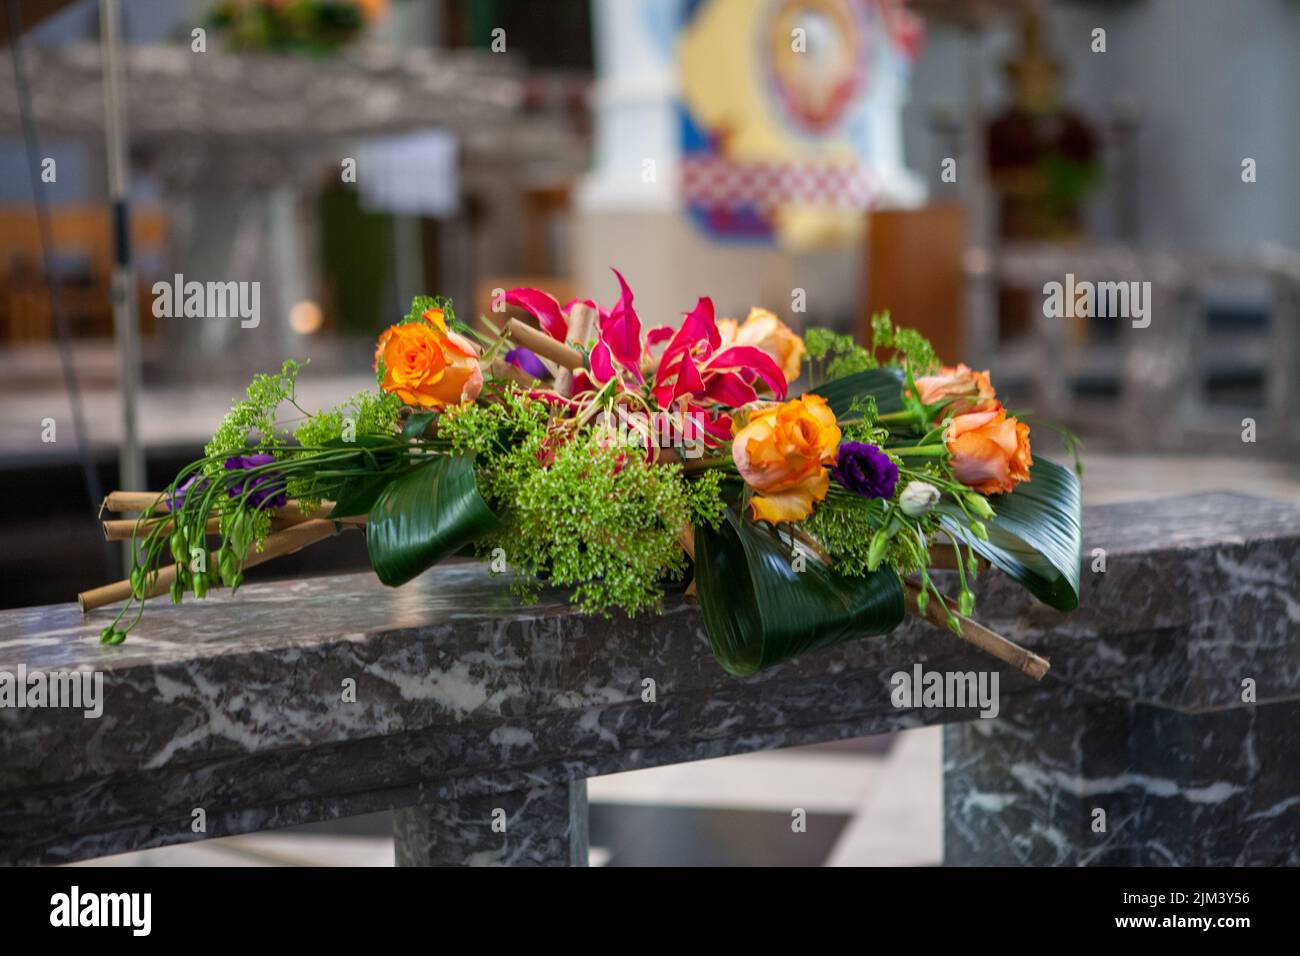 Bridal Impressions, colorful floral decoration at the altar during the wedding ceremony at the church. High quality photo Stock Photo